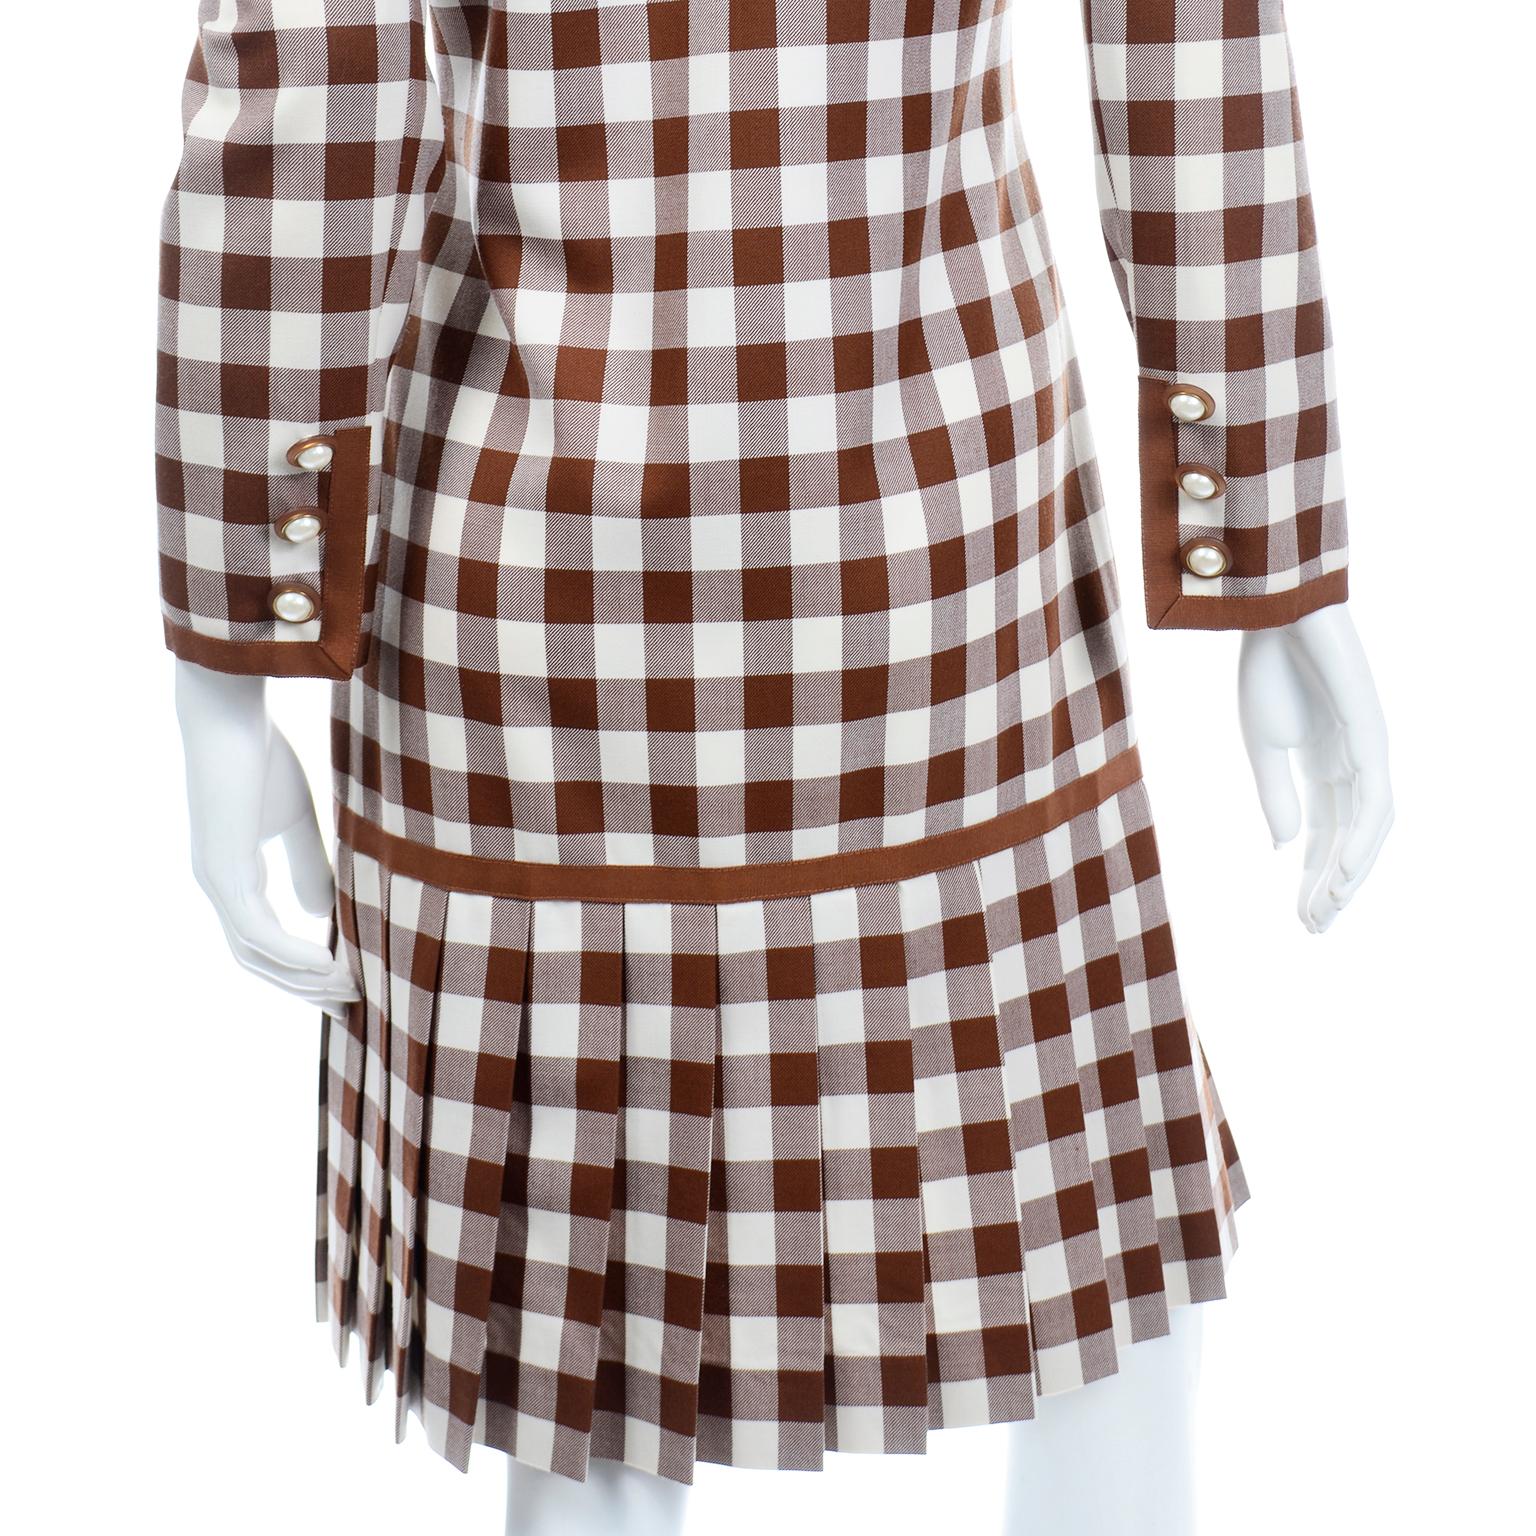 Oscar de la Renta Brown and White Check Dress New With Original Tags In New Condition For Sale In Portland, OR